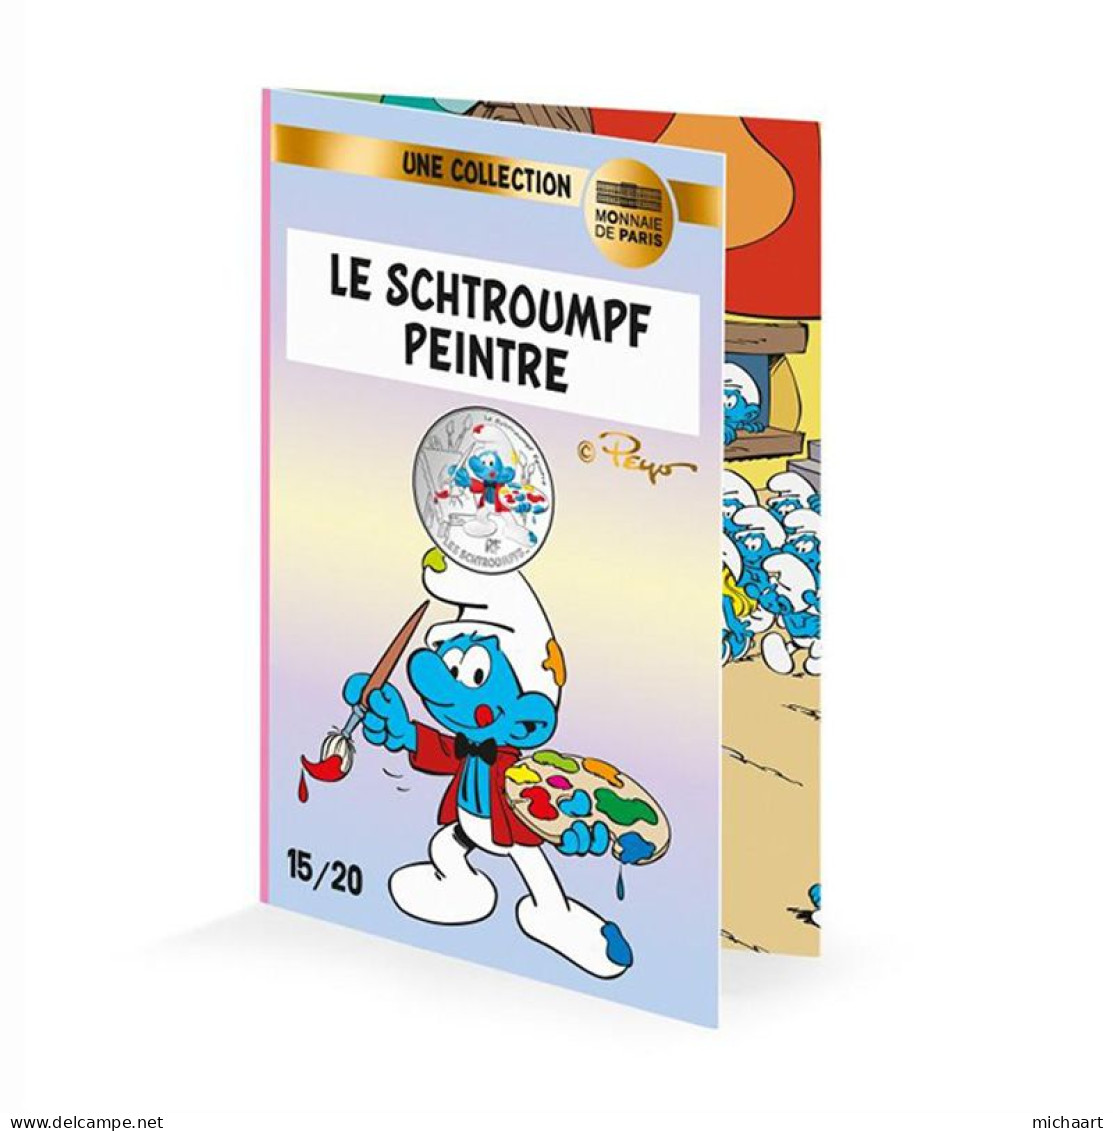 France 10 Euro Silver 2020 Painter The Smurfs Colored Coin Cartoon 01852 - Commemorative